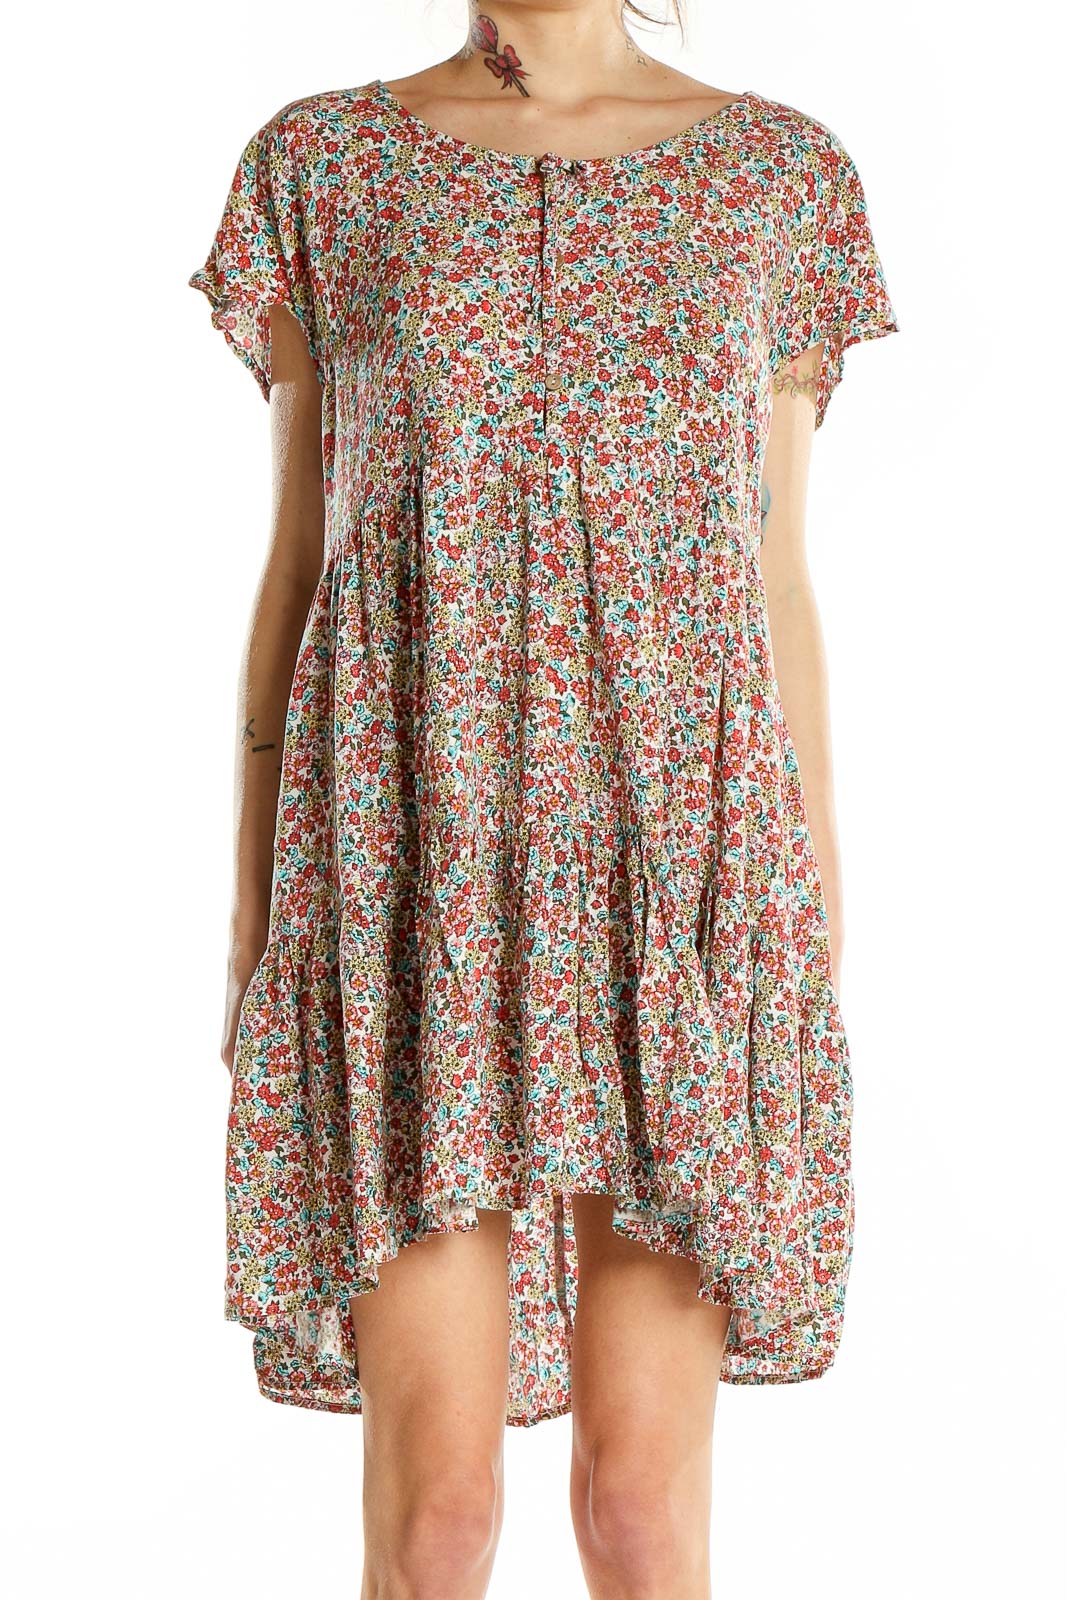 Beige Brown Holiday Bohemian Floral Dress Front